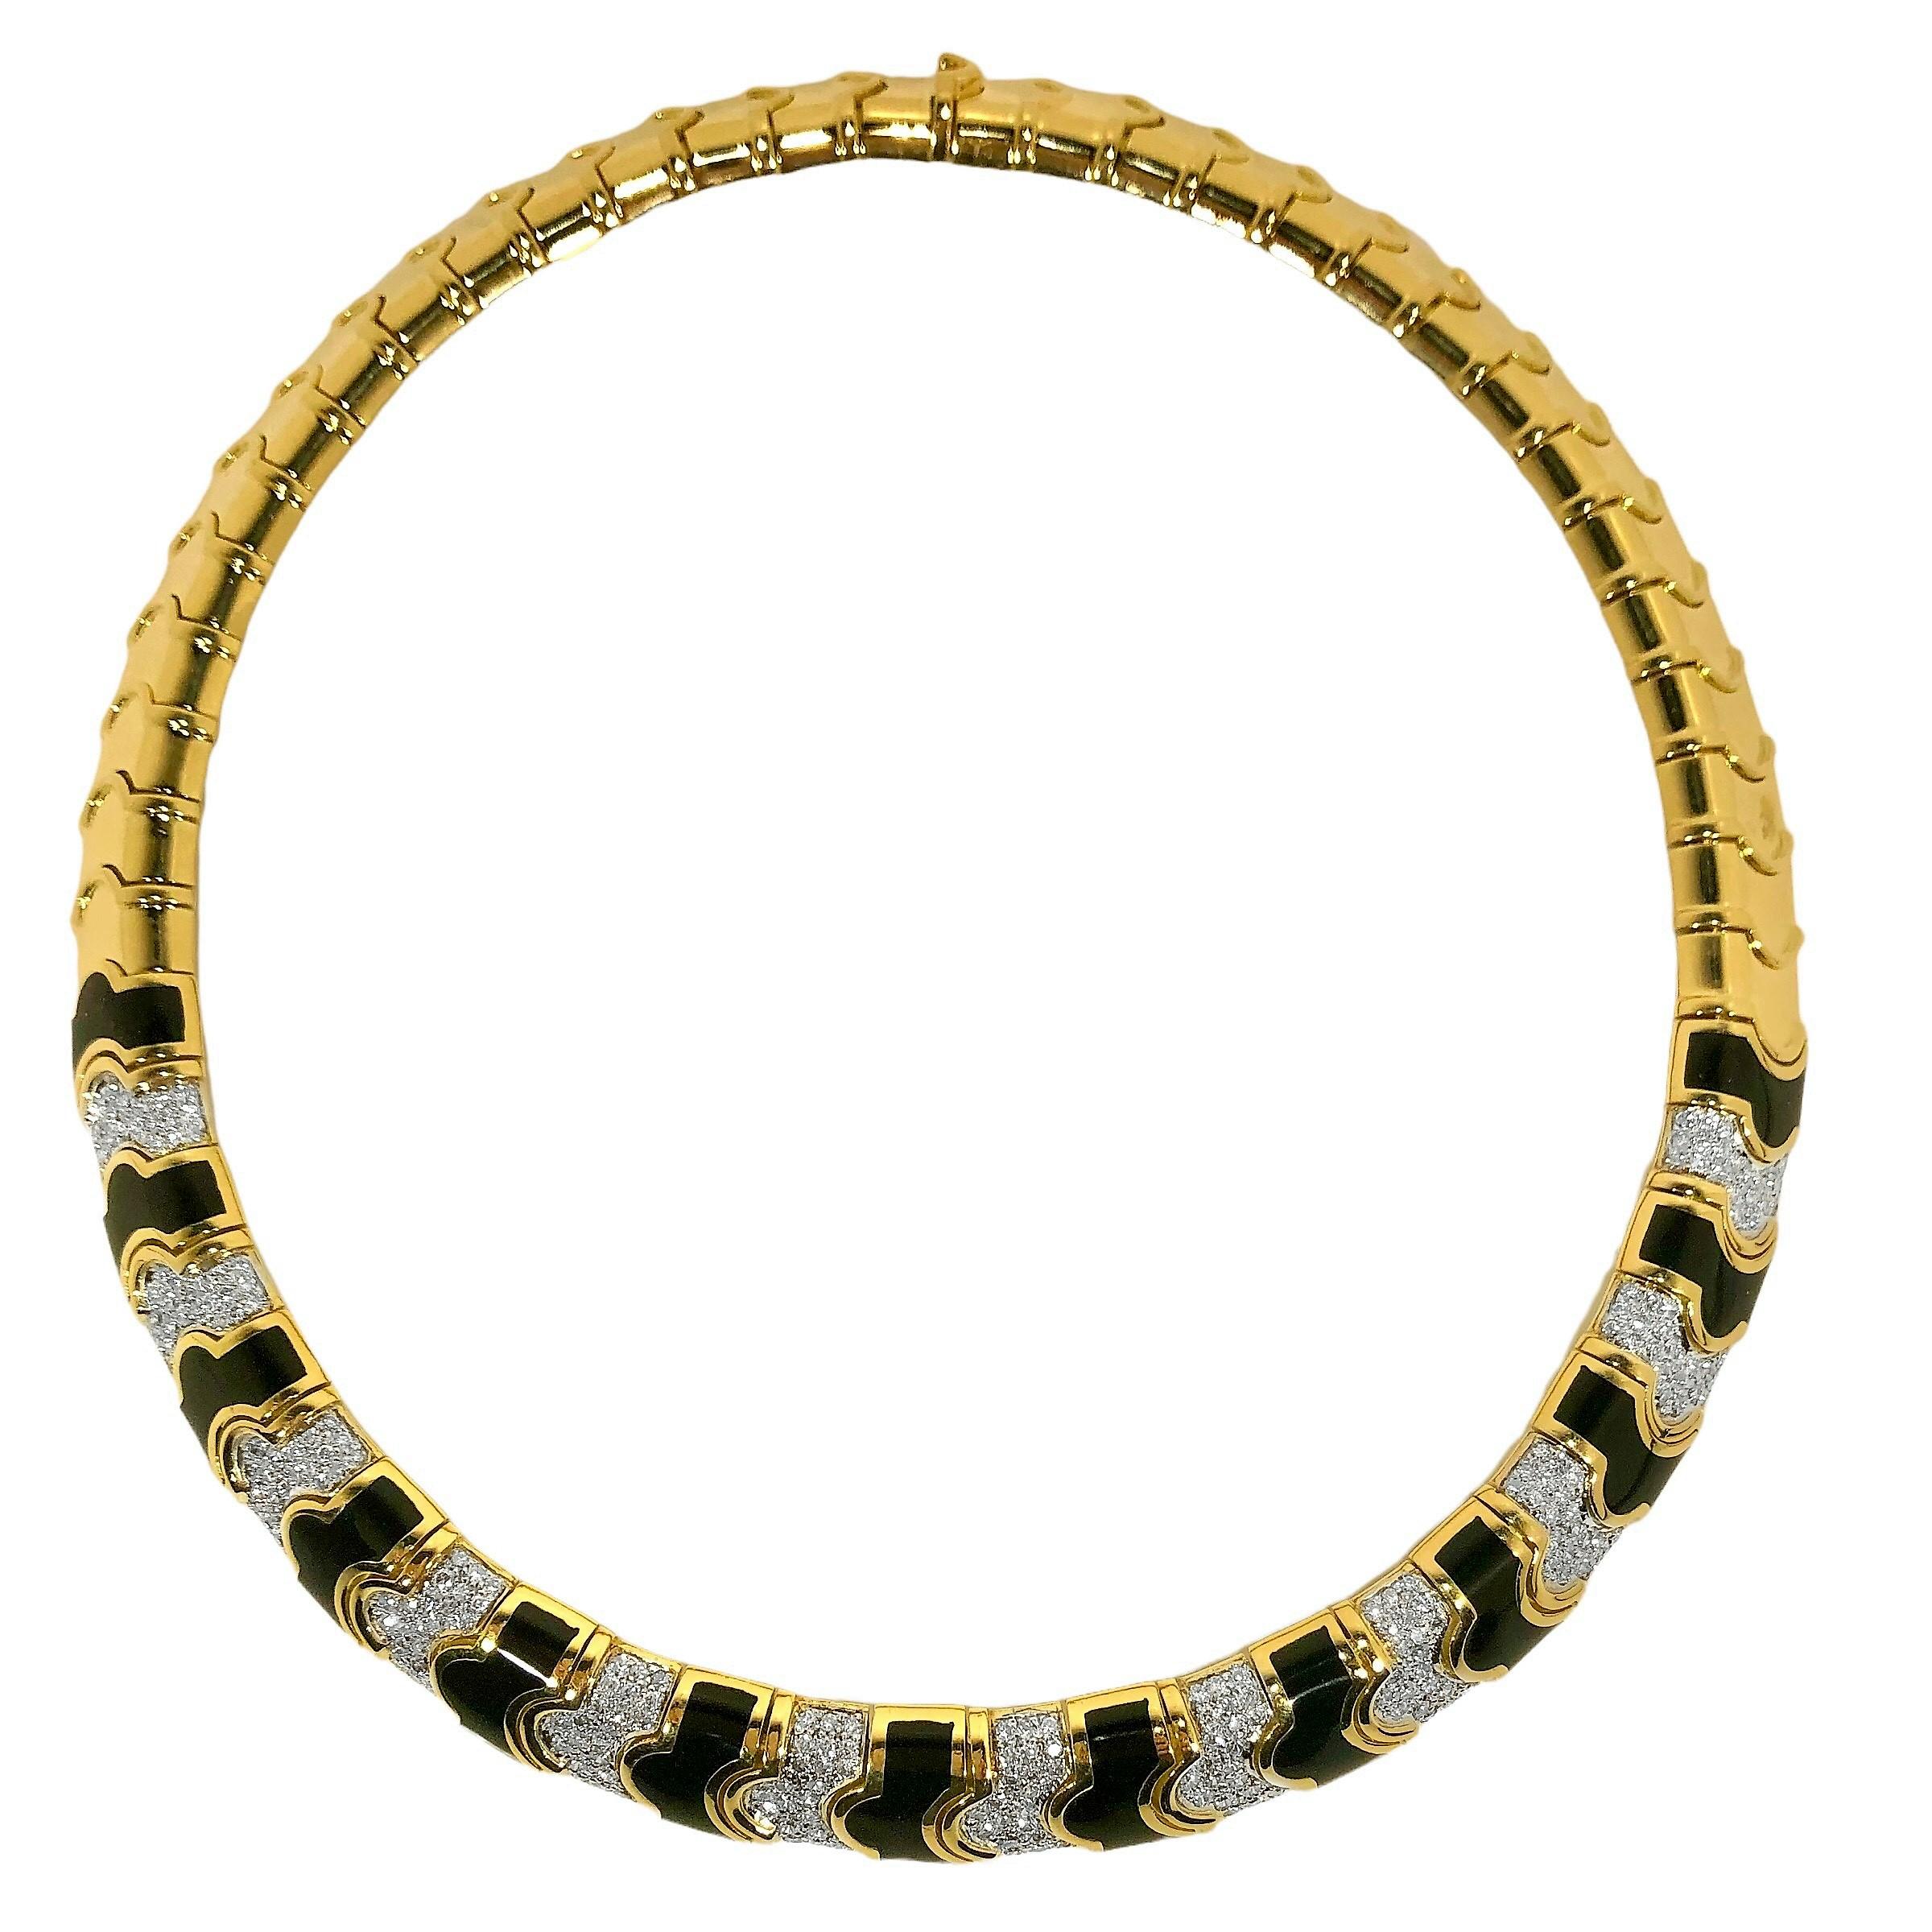 This beautifully designed, very well constructed and substantial, scallop motif choker necklace is reminiscent of many similar pieces created by the very best houses in this country and in Europe. Each of twelve front links are heavily diamond